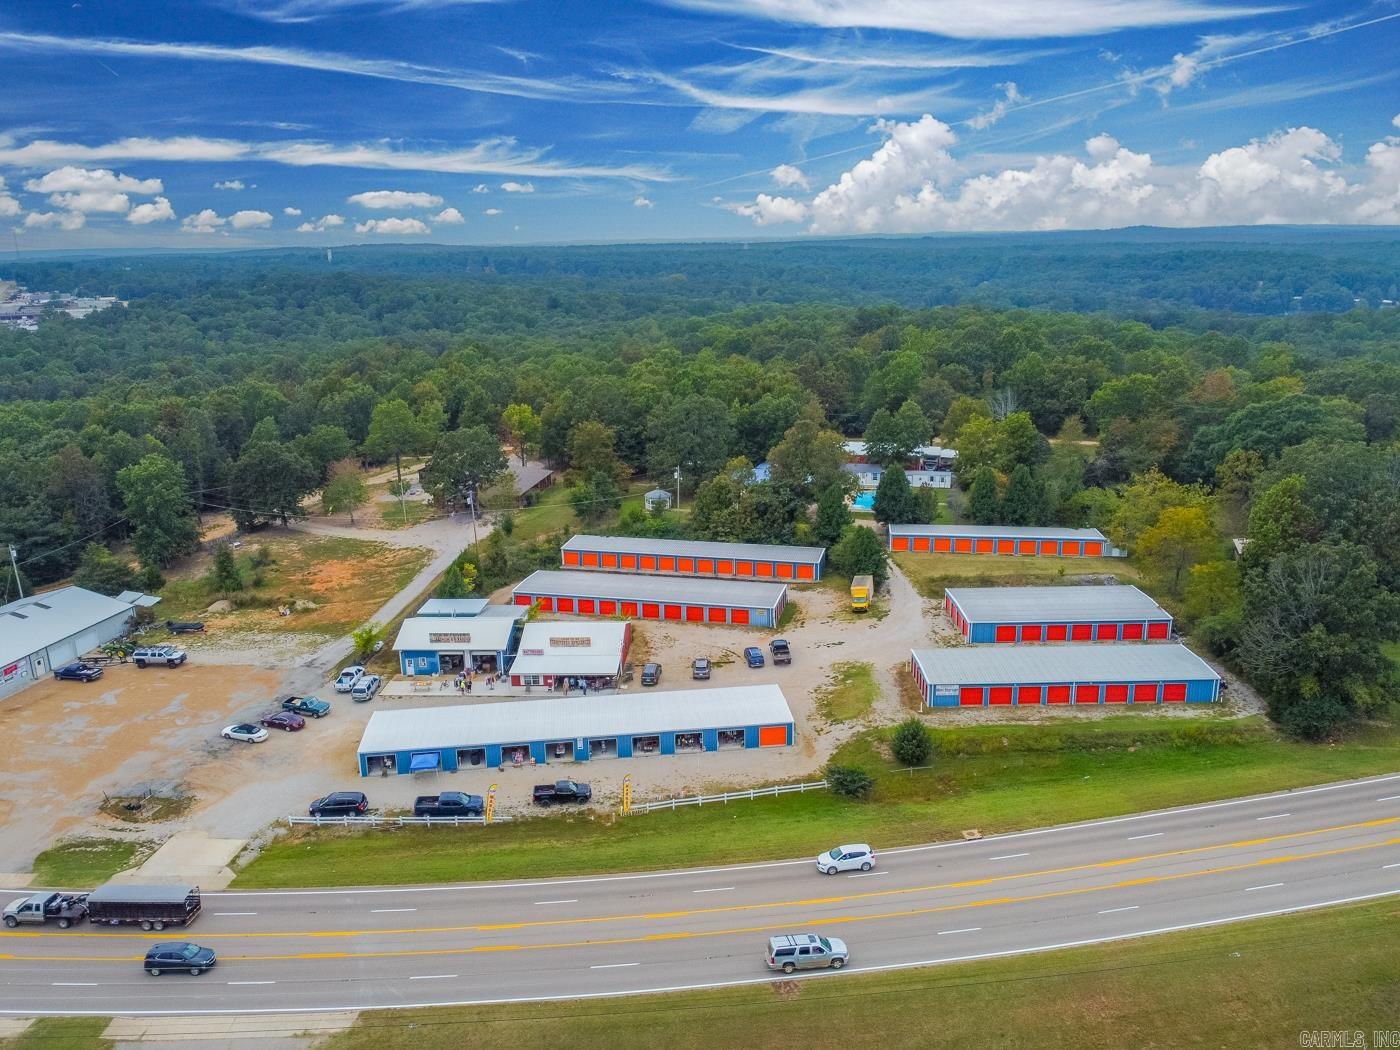 Commercial / Industrial for sale – 2609  Highway 62 412 2530 Hwy 62/412  Highland, AR